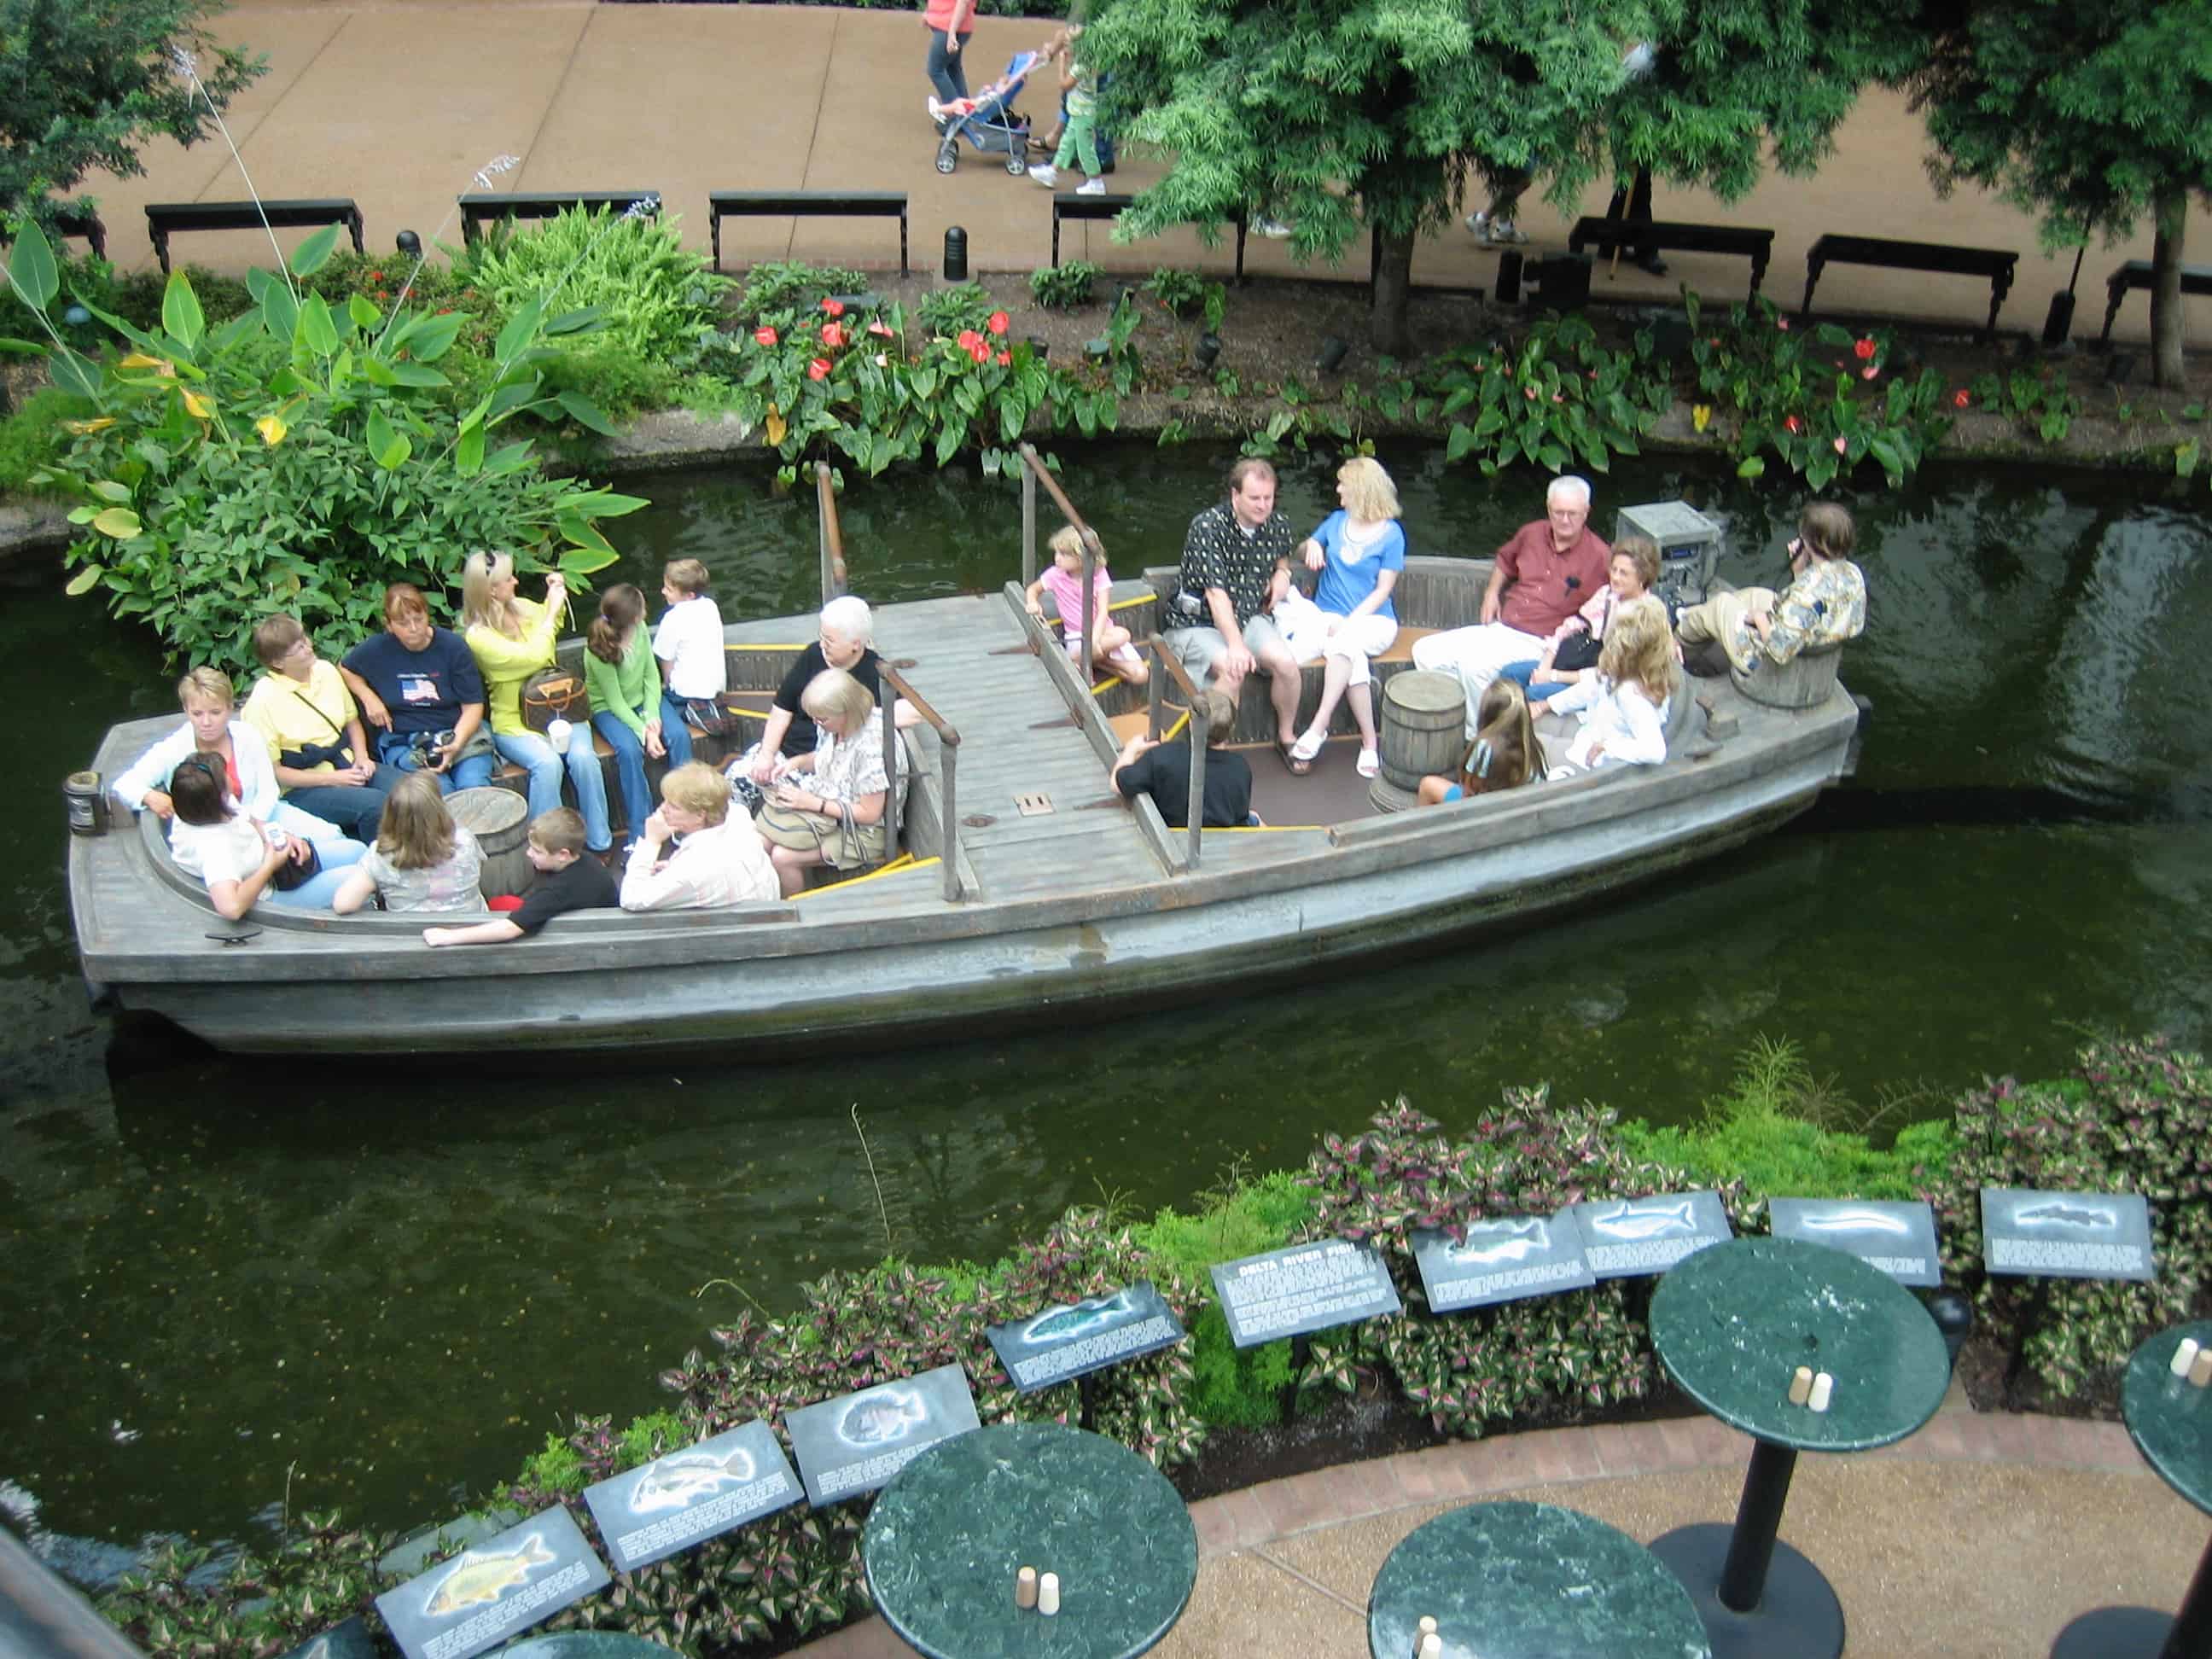 Cruise at the Gaylord Opryland in Nashville, Tennessee